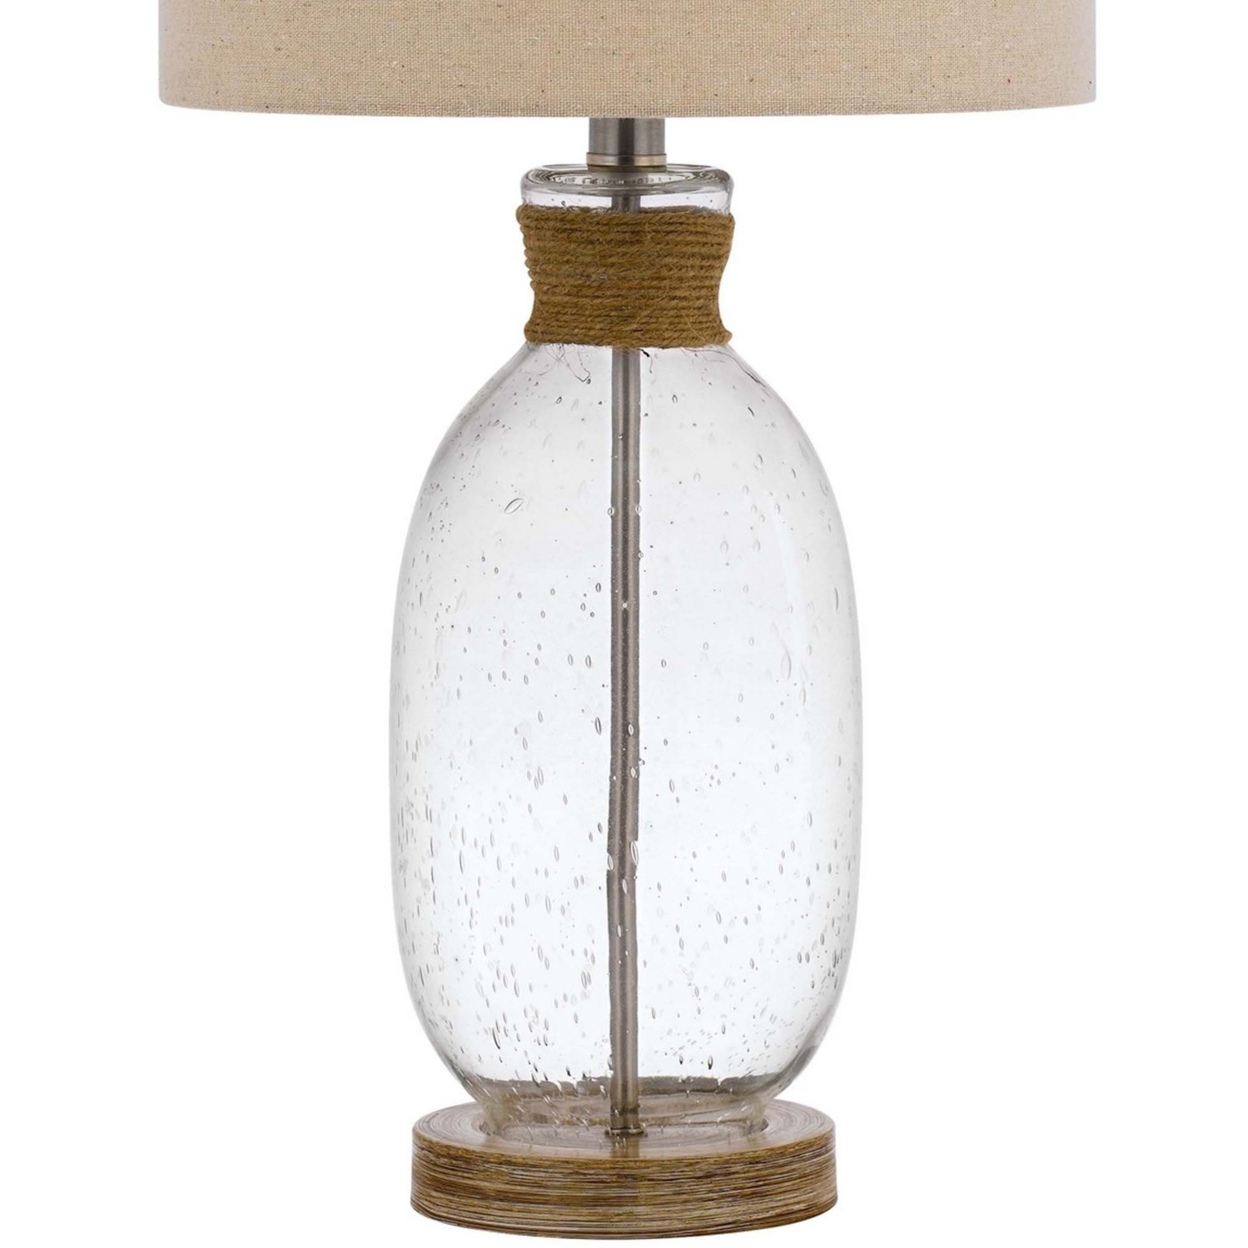 Table Lamp With Bubble Glass Body And Rope Accent, Beige- Saltoro Sherpi